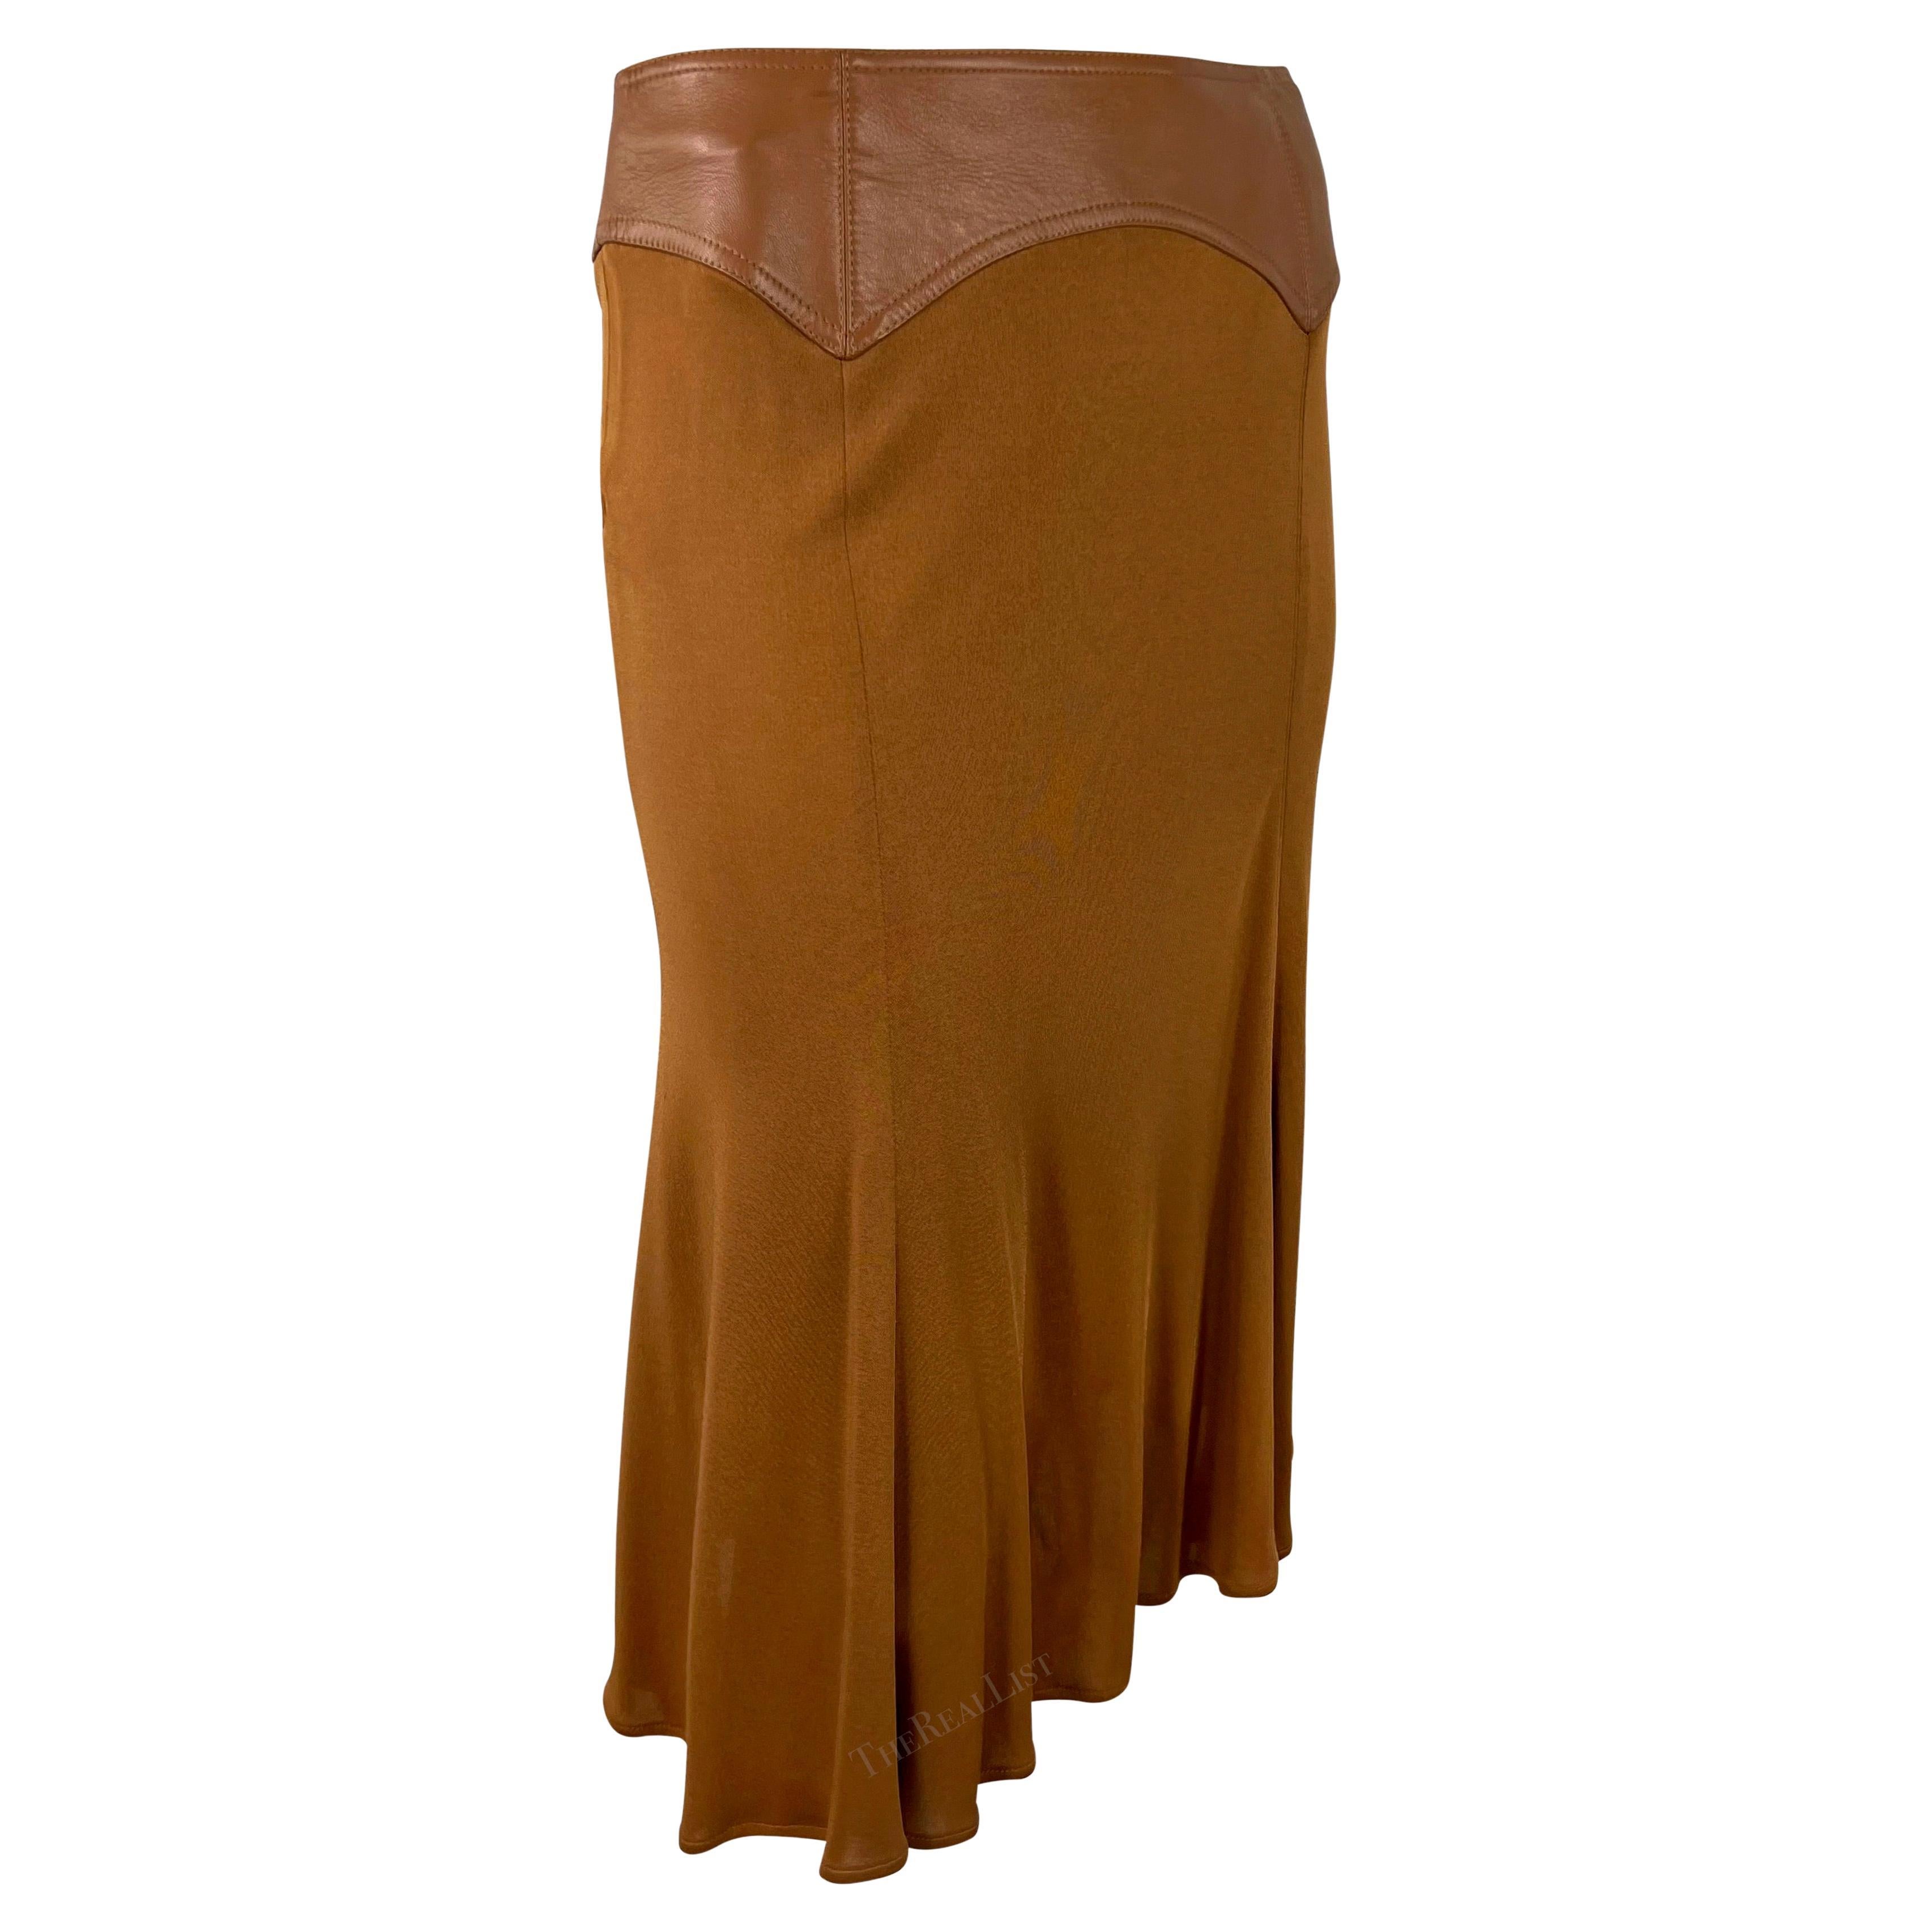 F/W 2001 Gianni Versace by Donatella Light Saddle Brown Leather Bodycon Skirt For Sale 4